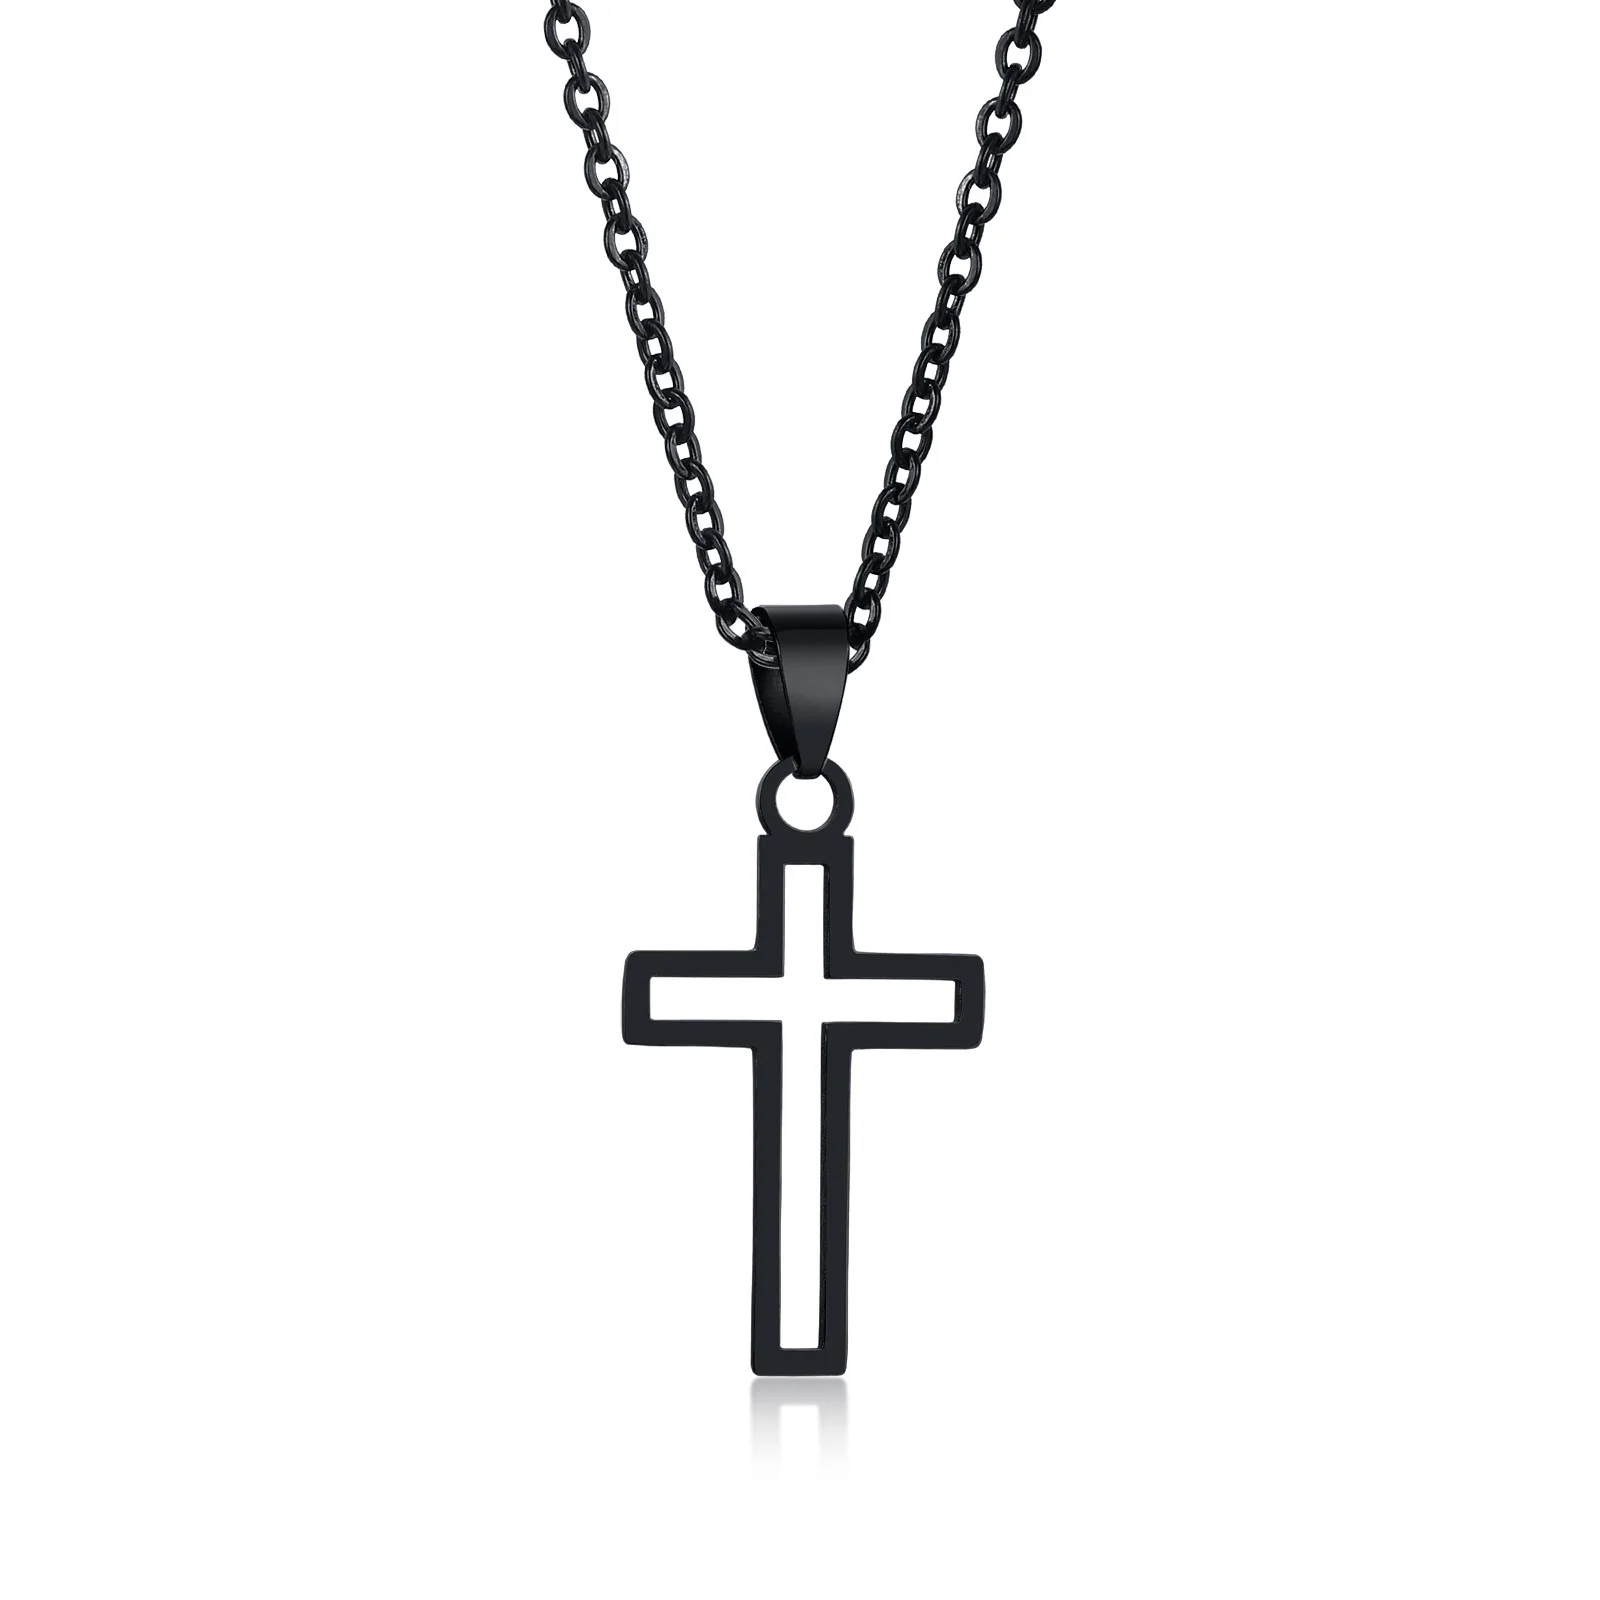 Layered Silver Cross Necklace Men Waterproof Stainless Steel Chain Necklace  J021 | eBay